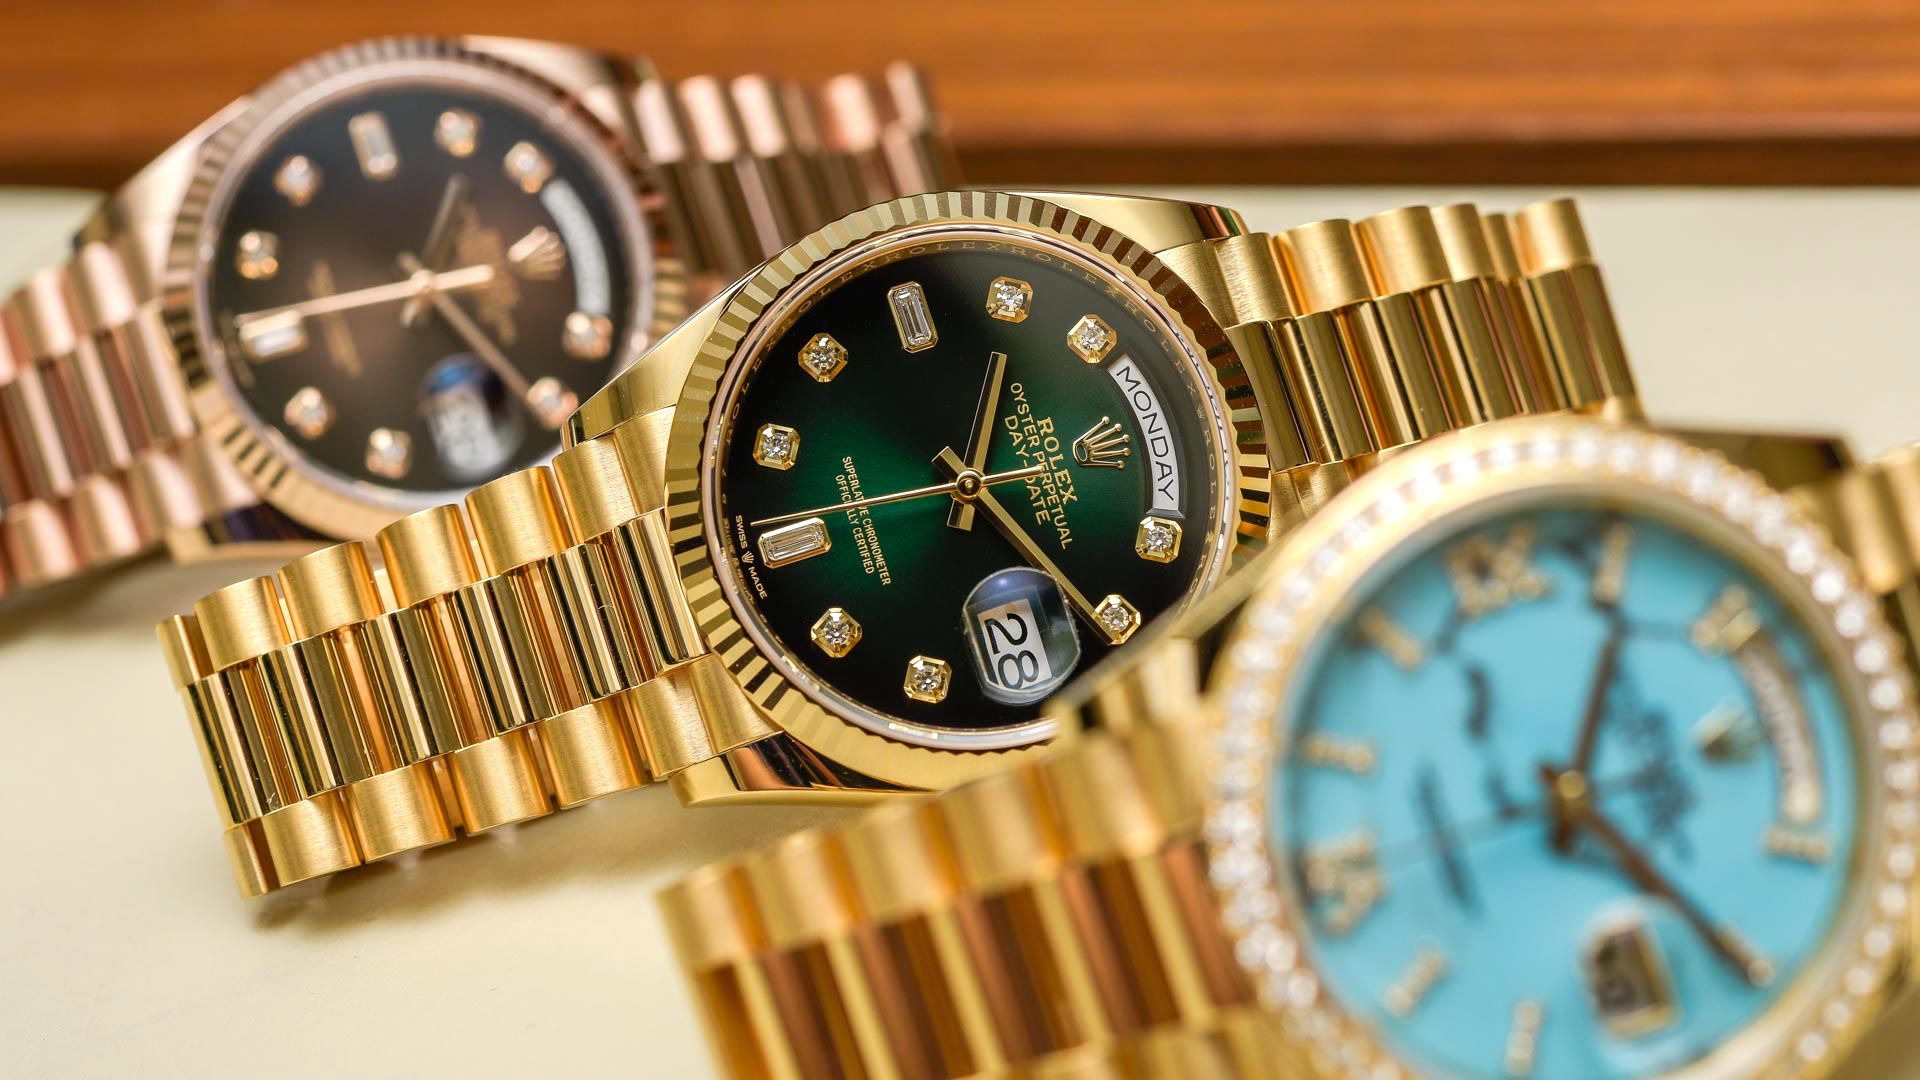 Updated Rolex Day Date 36 Watches For 2019 Hands On - Rolex Day Date 2019 - HD Wallpaper 